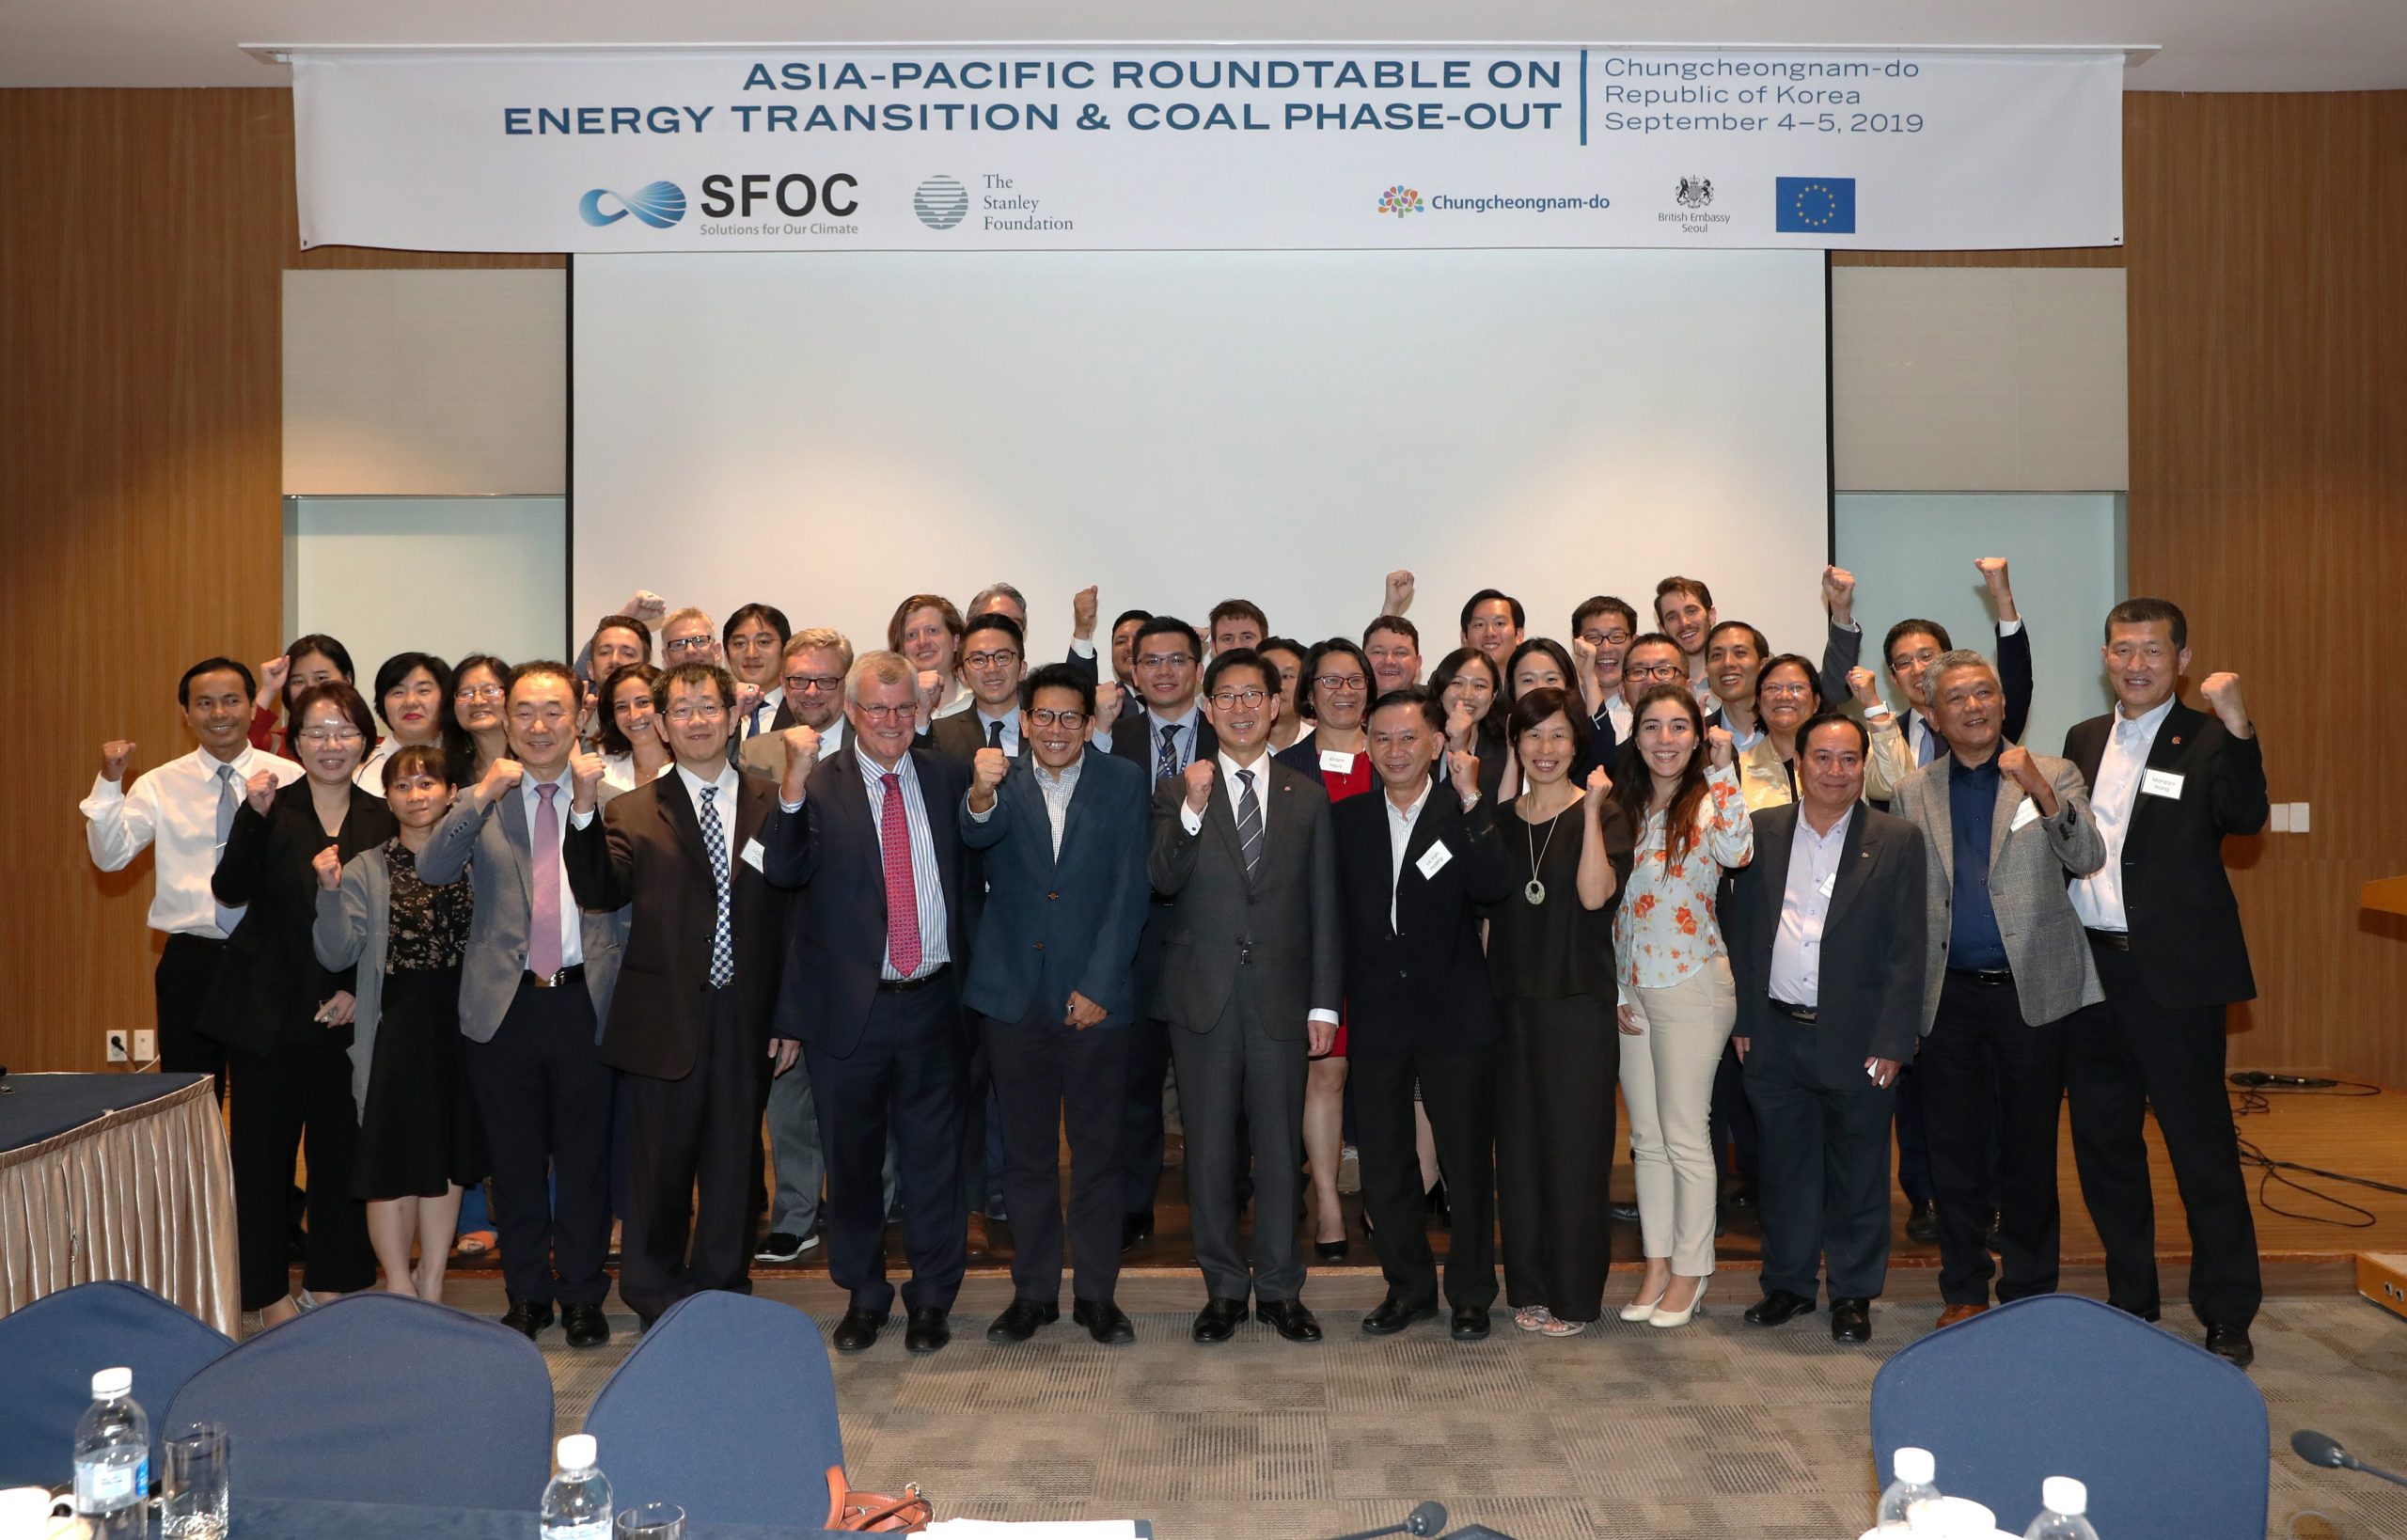 Korea: IUC Participates at Asia-Pacific Roundtable on Energy Transition & Coal Phase-out